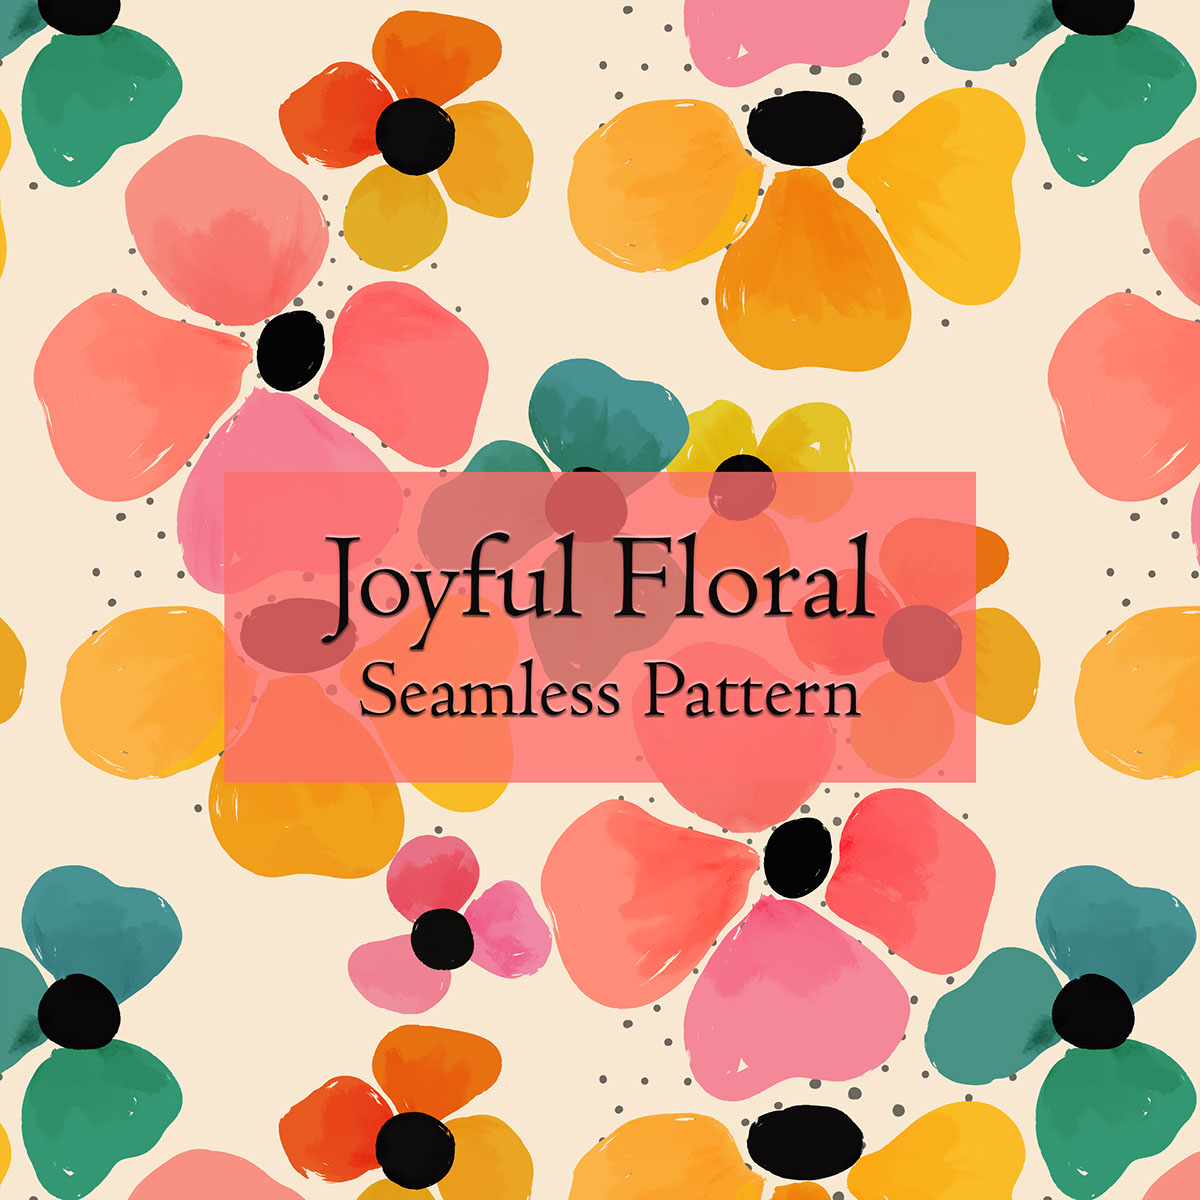 Joyful Floral Seamless Pattern 12x12 inches rendition image